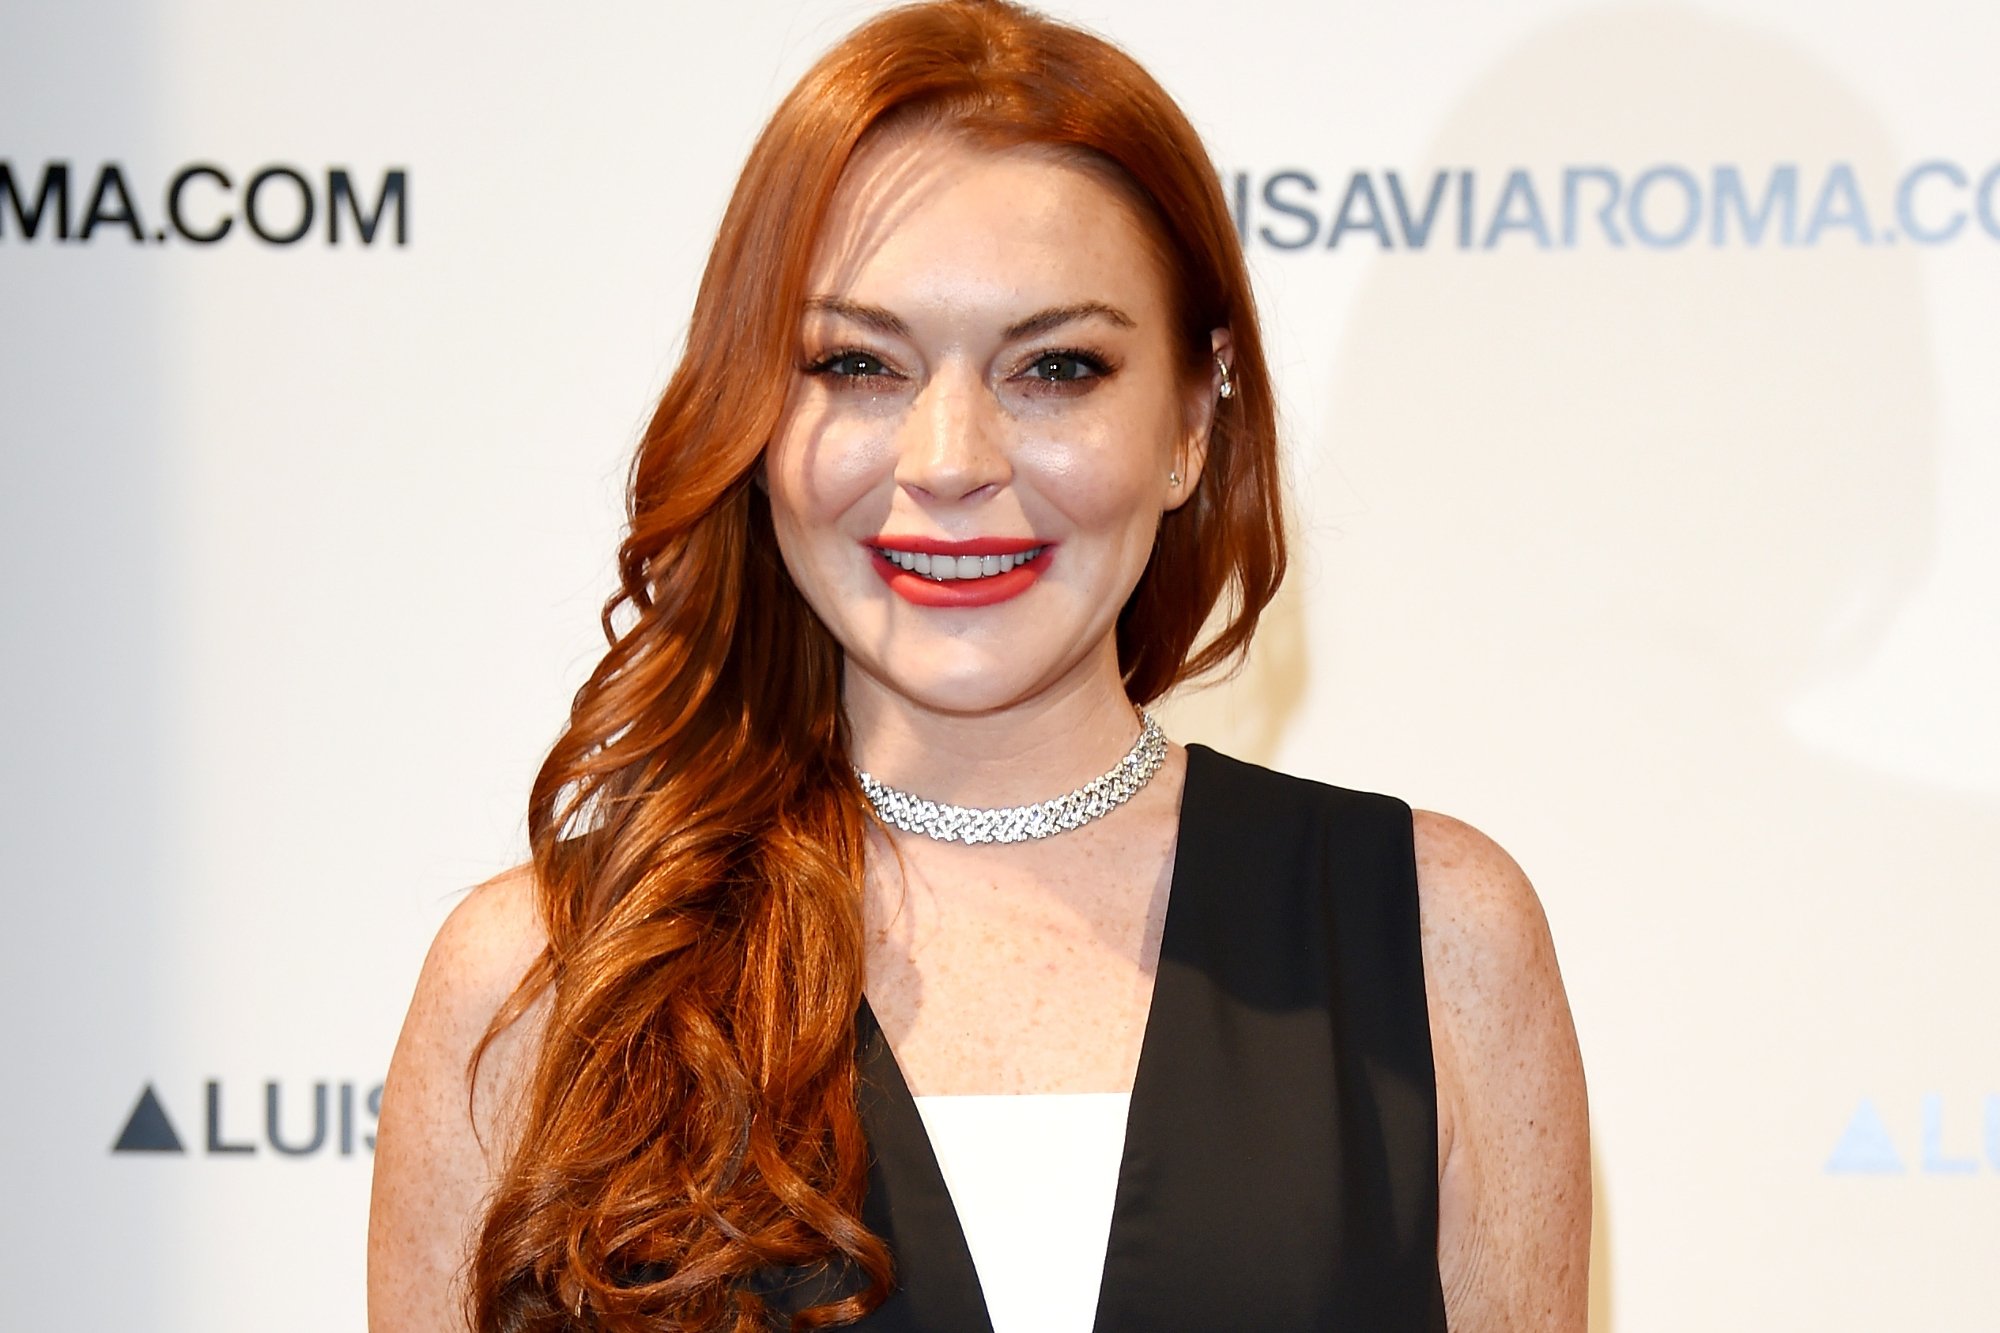 'Saturday Night Live' host Lindsay Lohan wearing a black and white top. She's smiling standing in front of a white step-and-repeat.